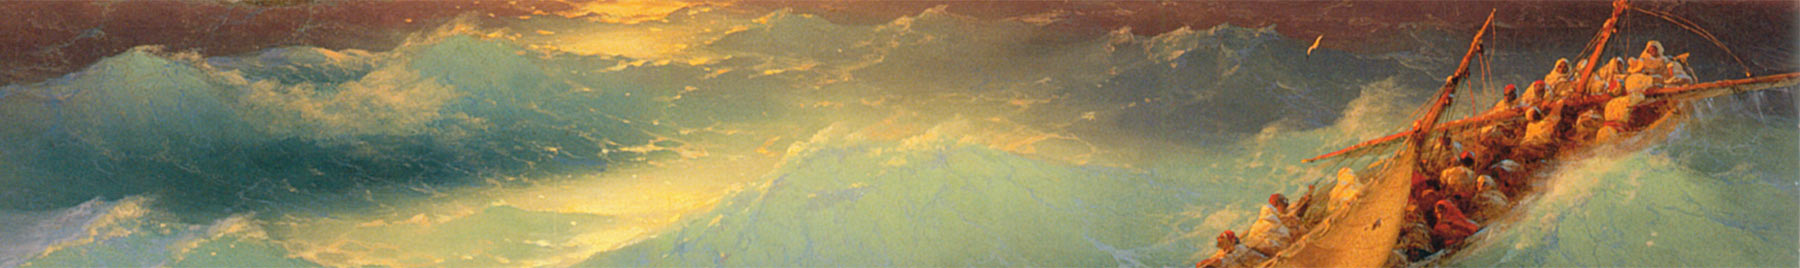 Detail from a painting by Aivazovsky showing a ship in the high seas at sunset.